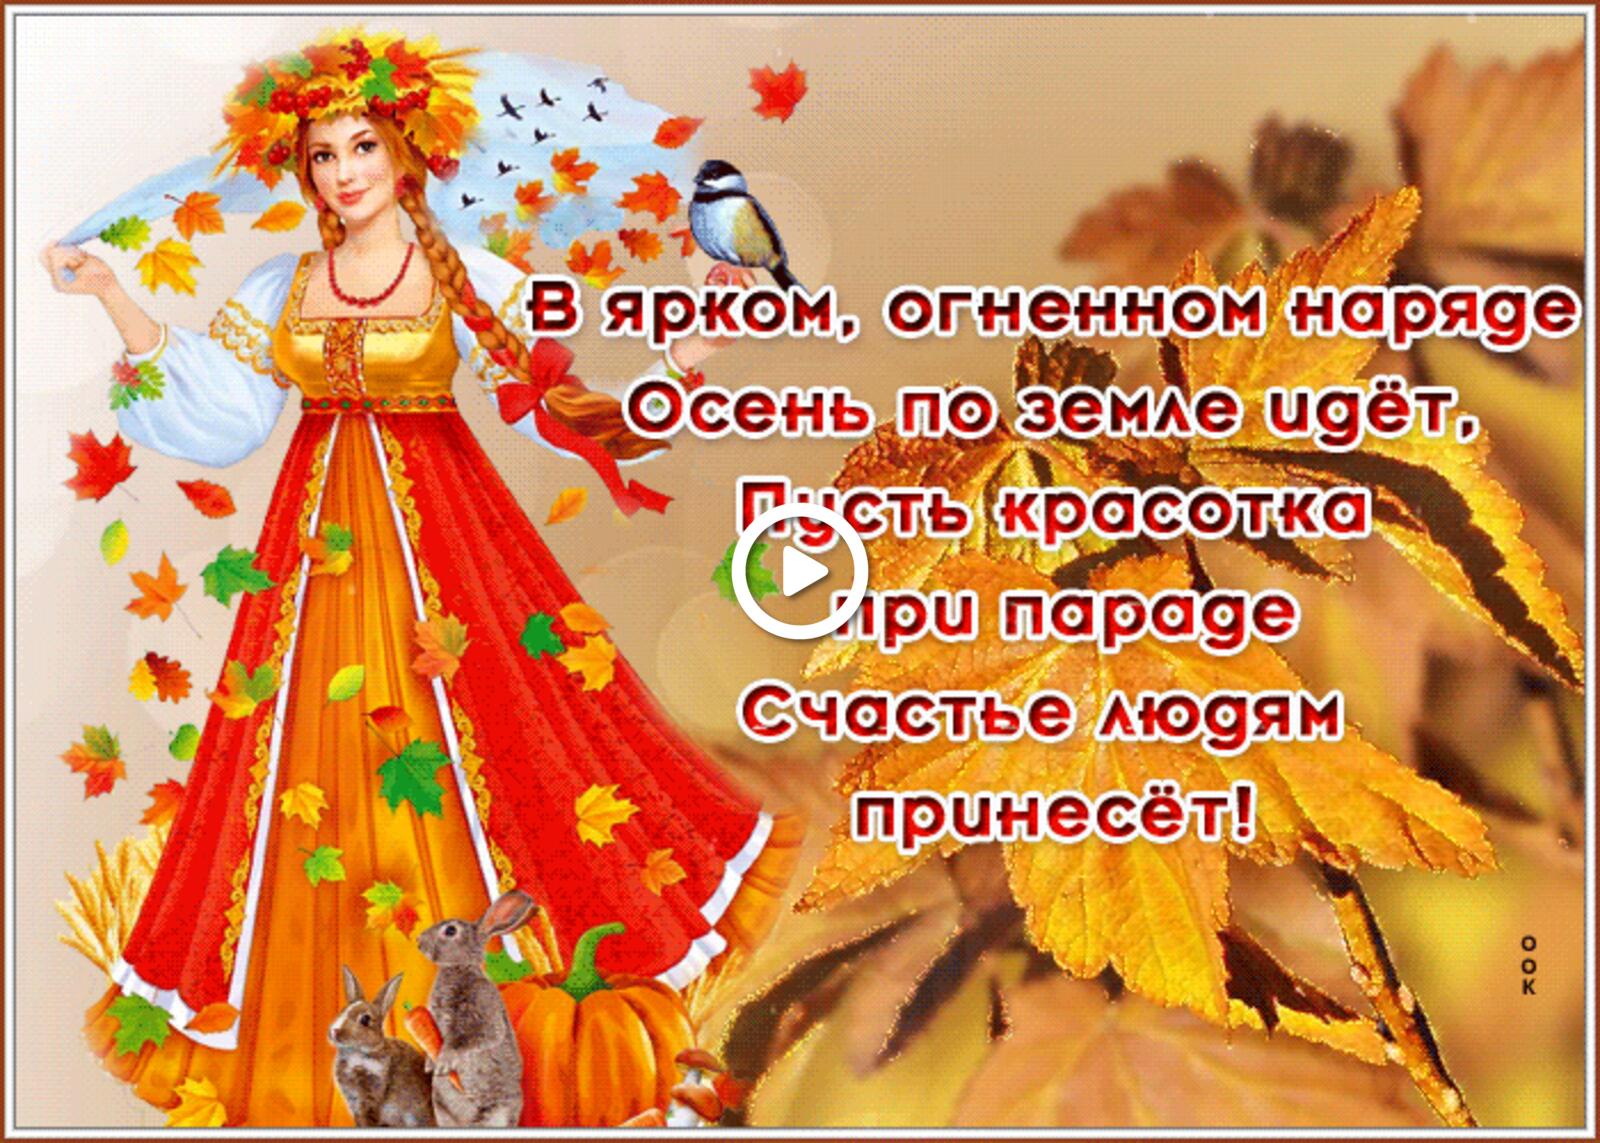 just live happily ever after fallen leaves autumn